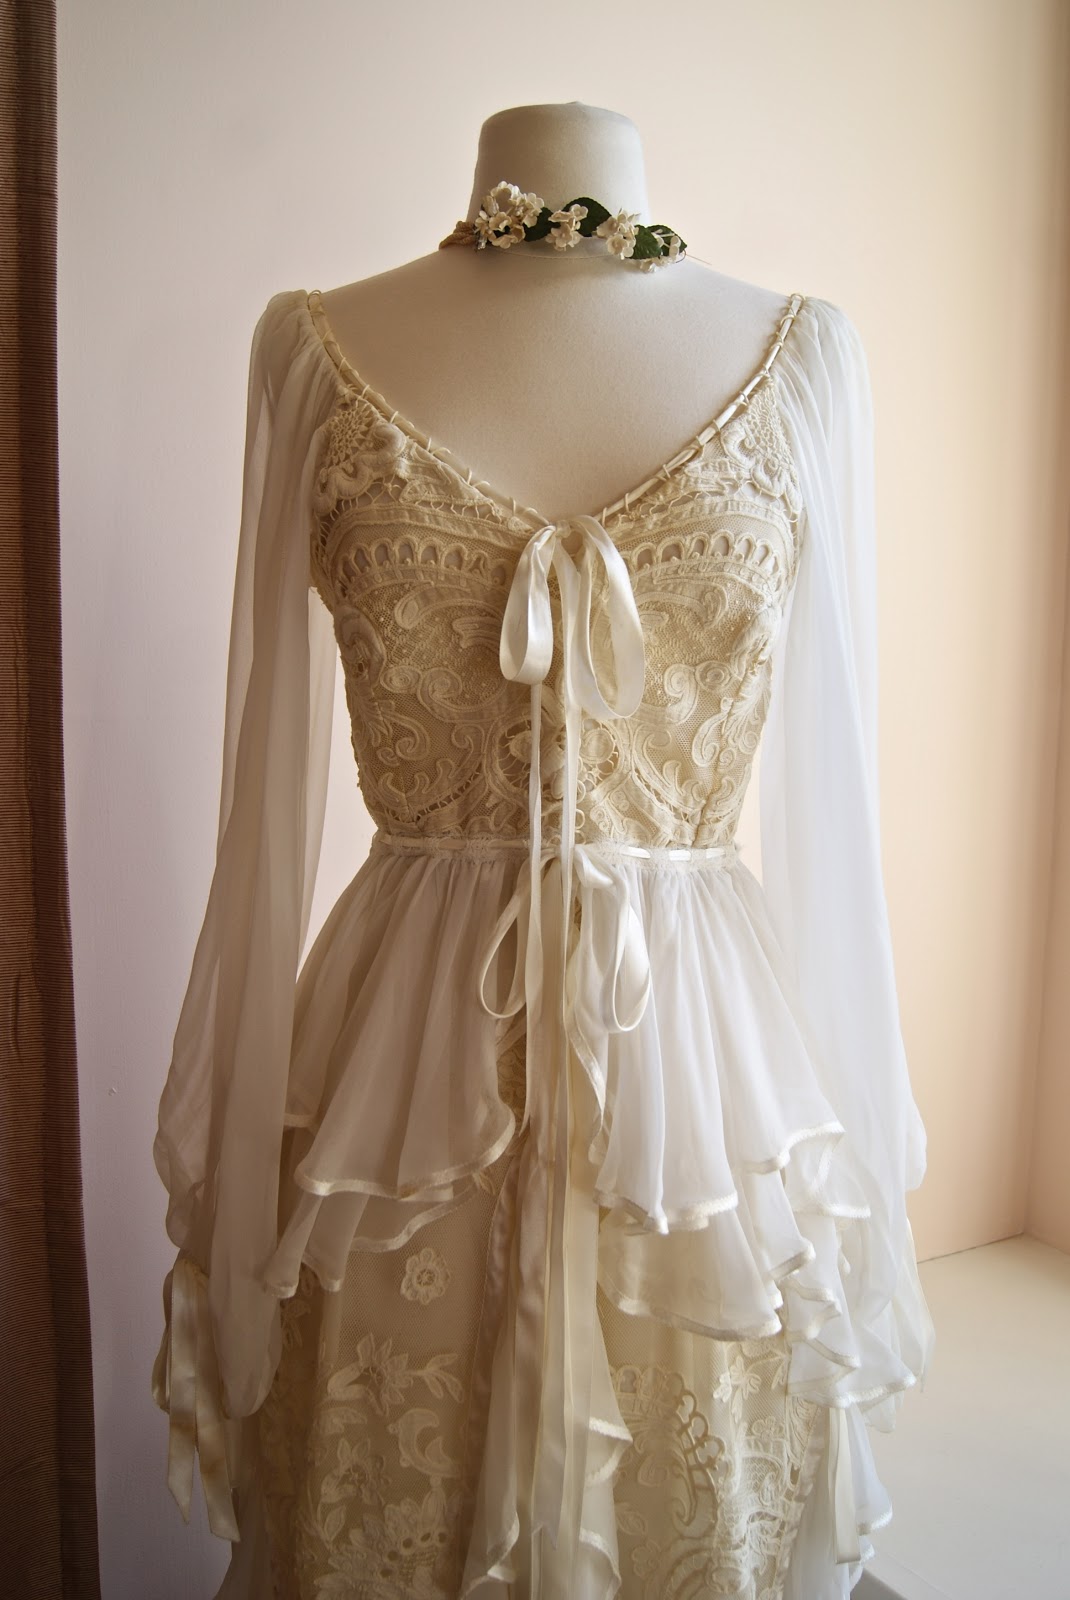 1970's Boho dream dress, custom made in New Orleans with antique lace ...